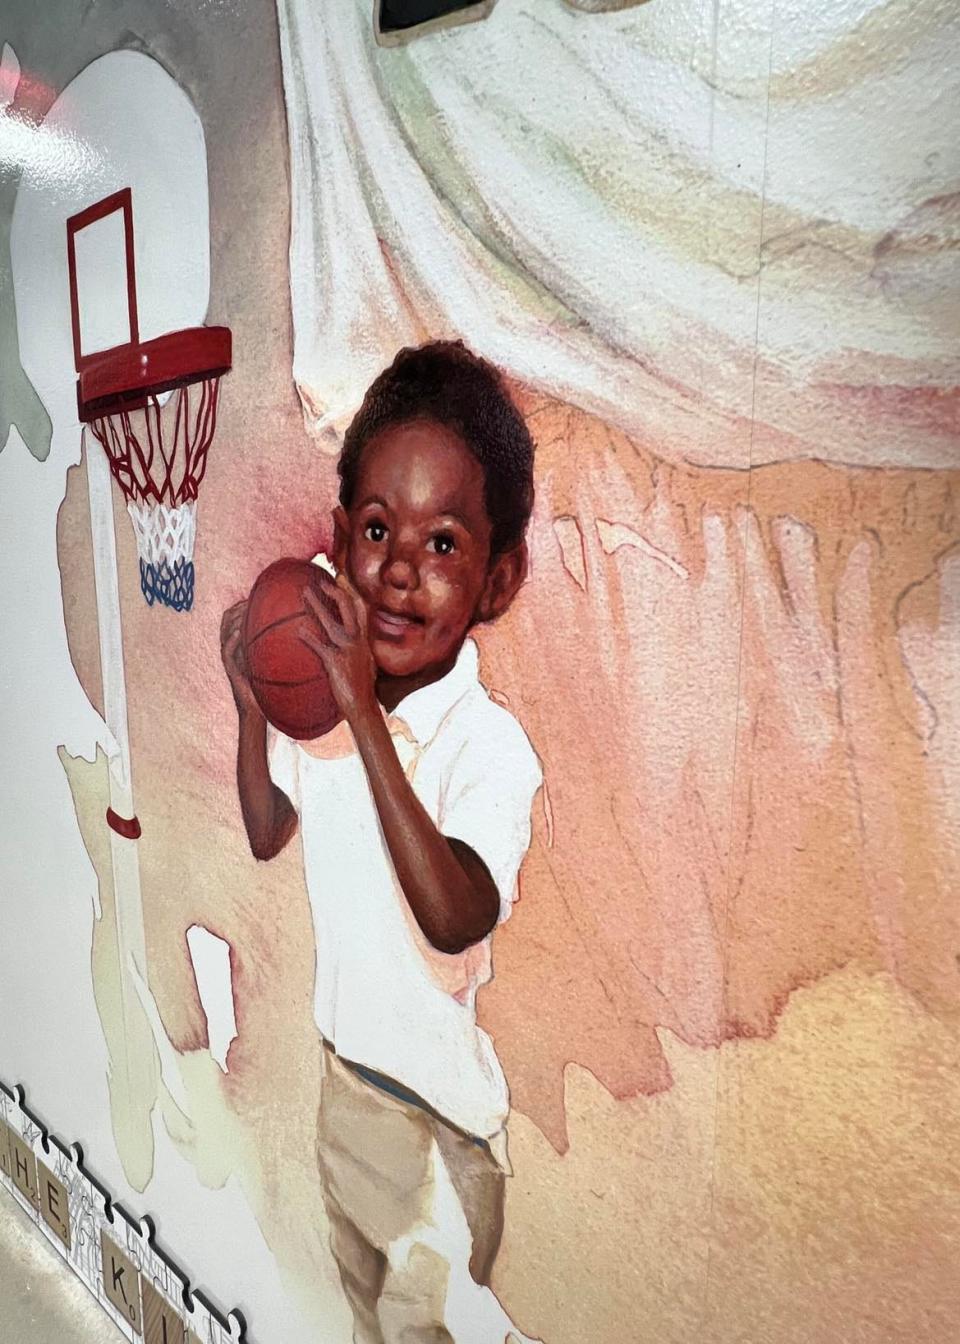 Titled "The Kid. The King. The One," a mural created by Stark County-based artist Dirk Rozich depicts different periods in the life of Akron native and NBA superstar LeBron James. The three-piece mural is on display at House Three Thirty at the entrance to the LeBron James museum in Akron.